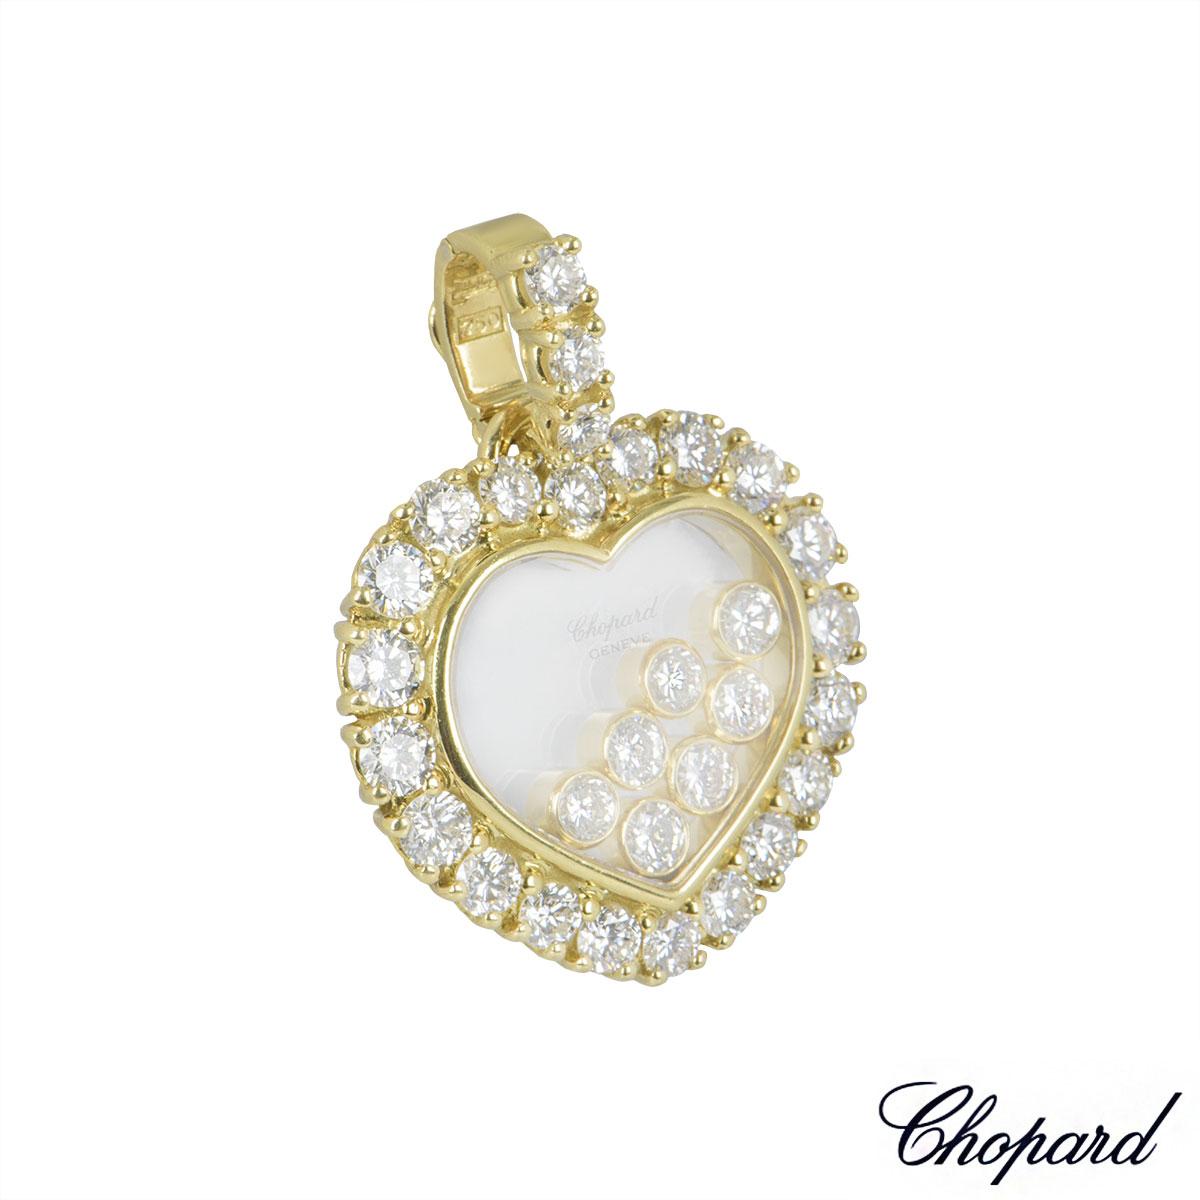 An 18k yellow gold pendant by Chopard from the Happy Diamonds collection. The pendant has 23 claw set round brilliant cut diamonds on the clasp and surrounding the outer edge totalling approximately 1.47ct. In the centre are 7 round brilliant cut